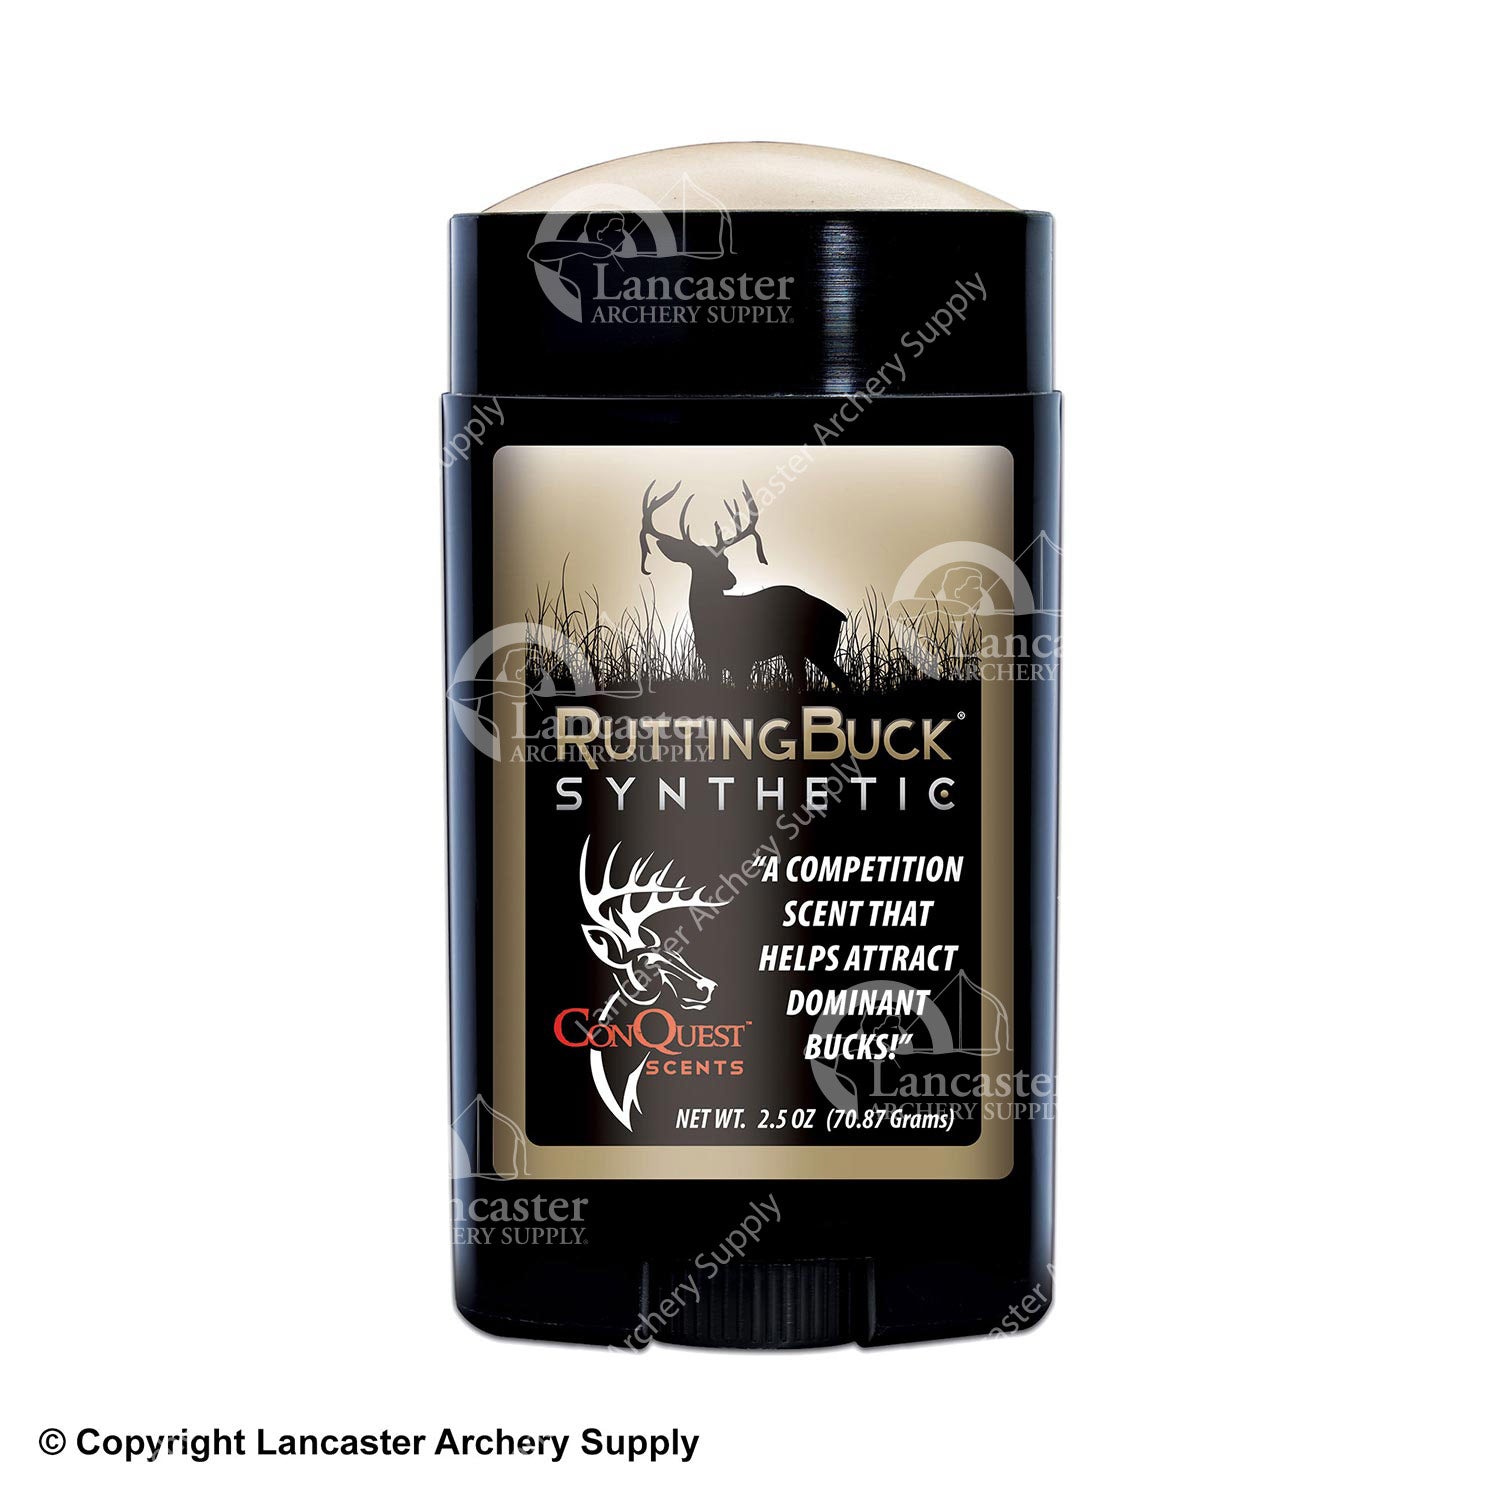 ConQuest Synthetic Rutting Buck Testosterone Stick